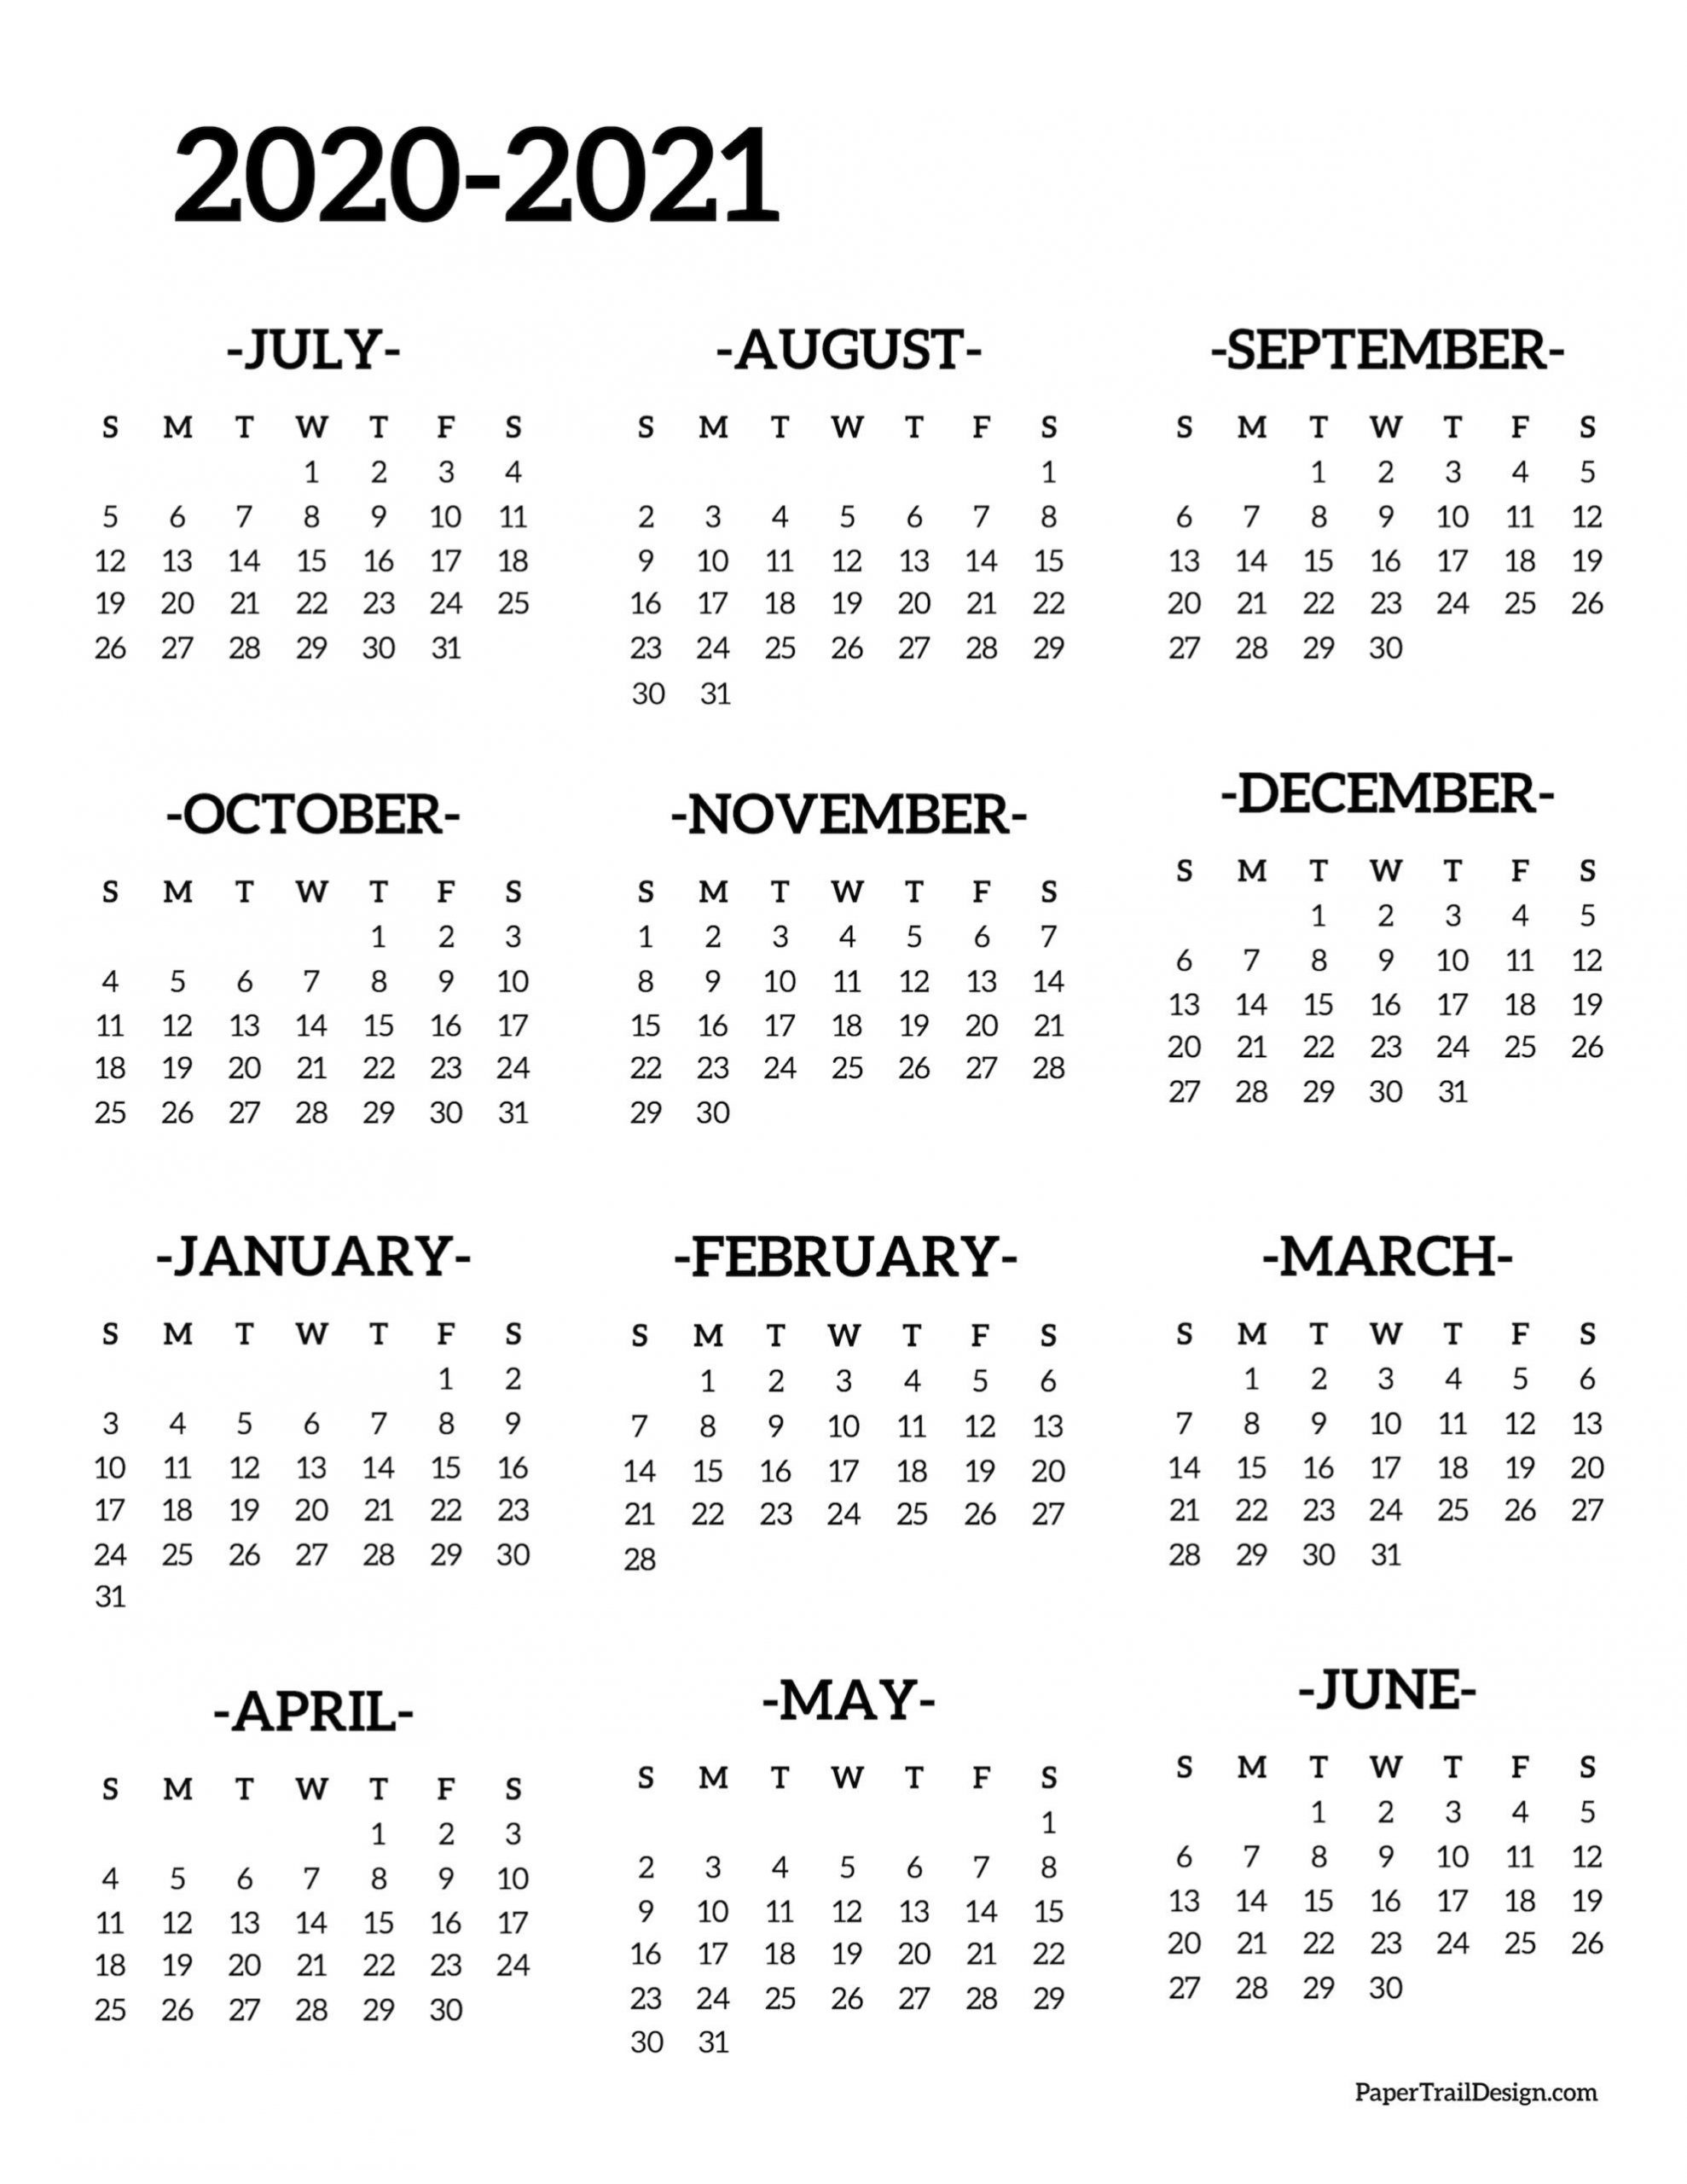 2020-2021 School Year Calendar Free Printable | Paper Trail pertaining to Free Printable Year At A Glance Calendars No Download 2020